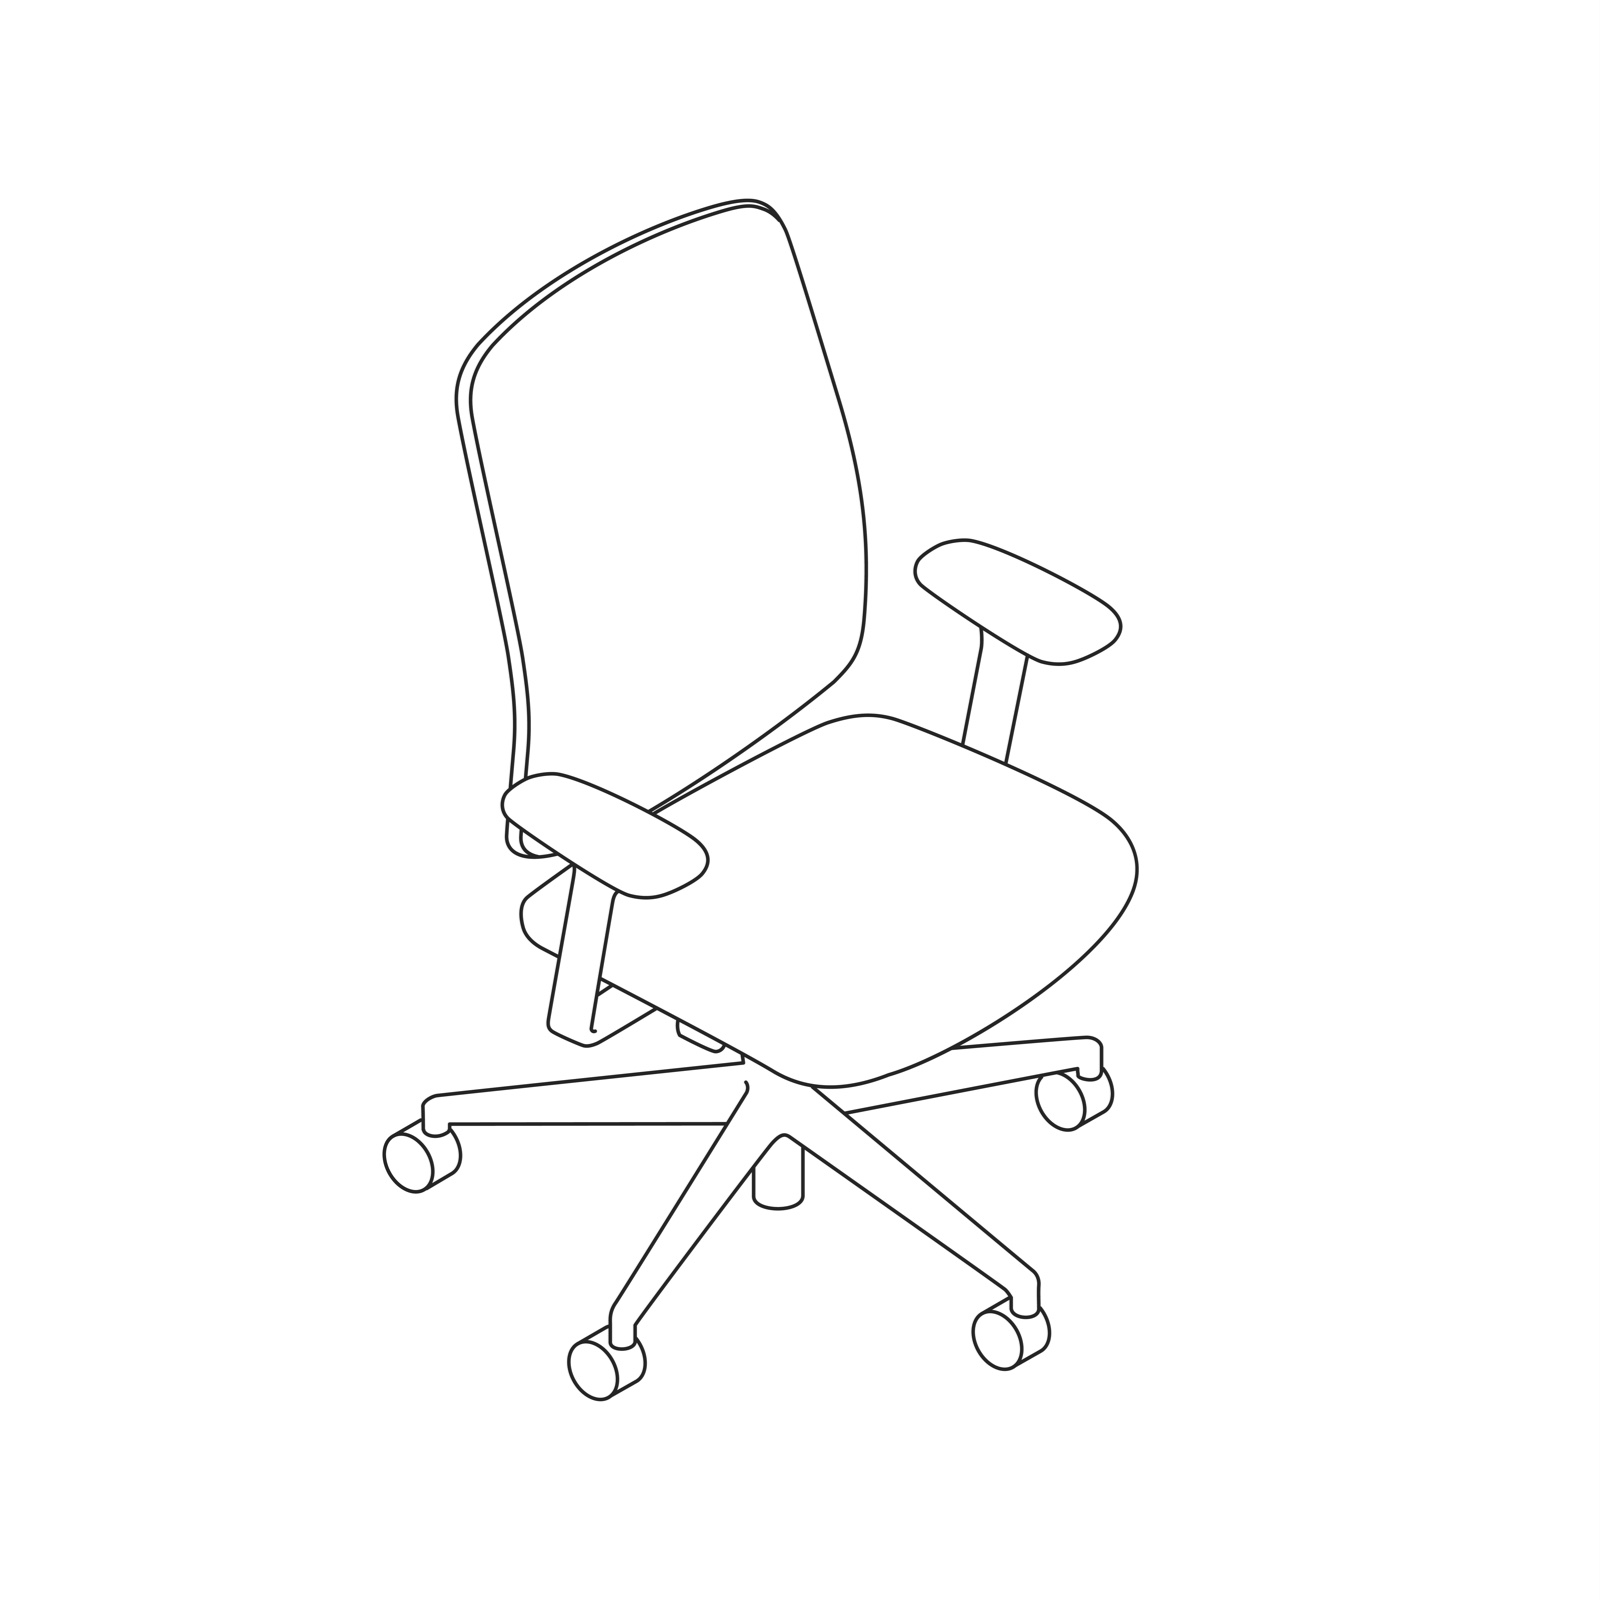 A line drawing of a Verus Chair.